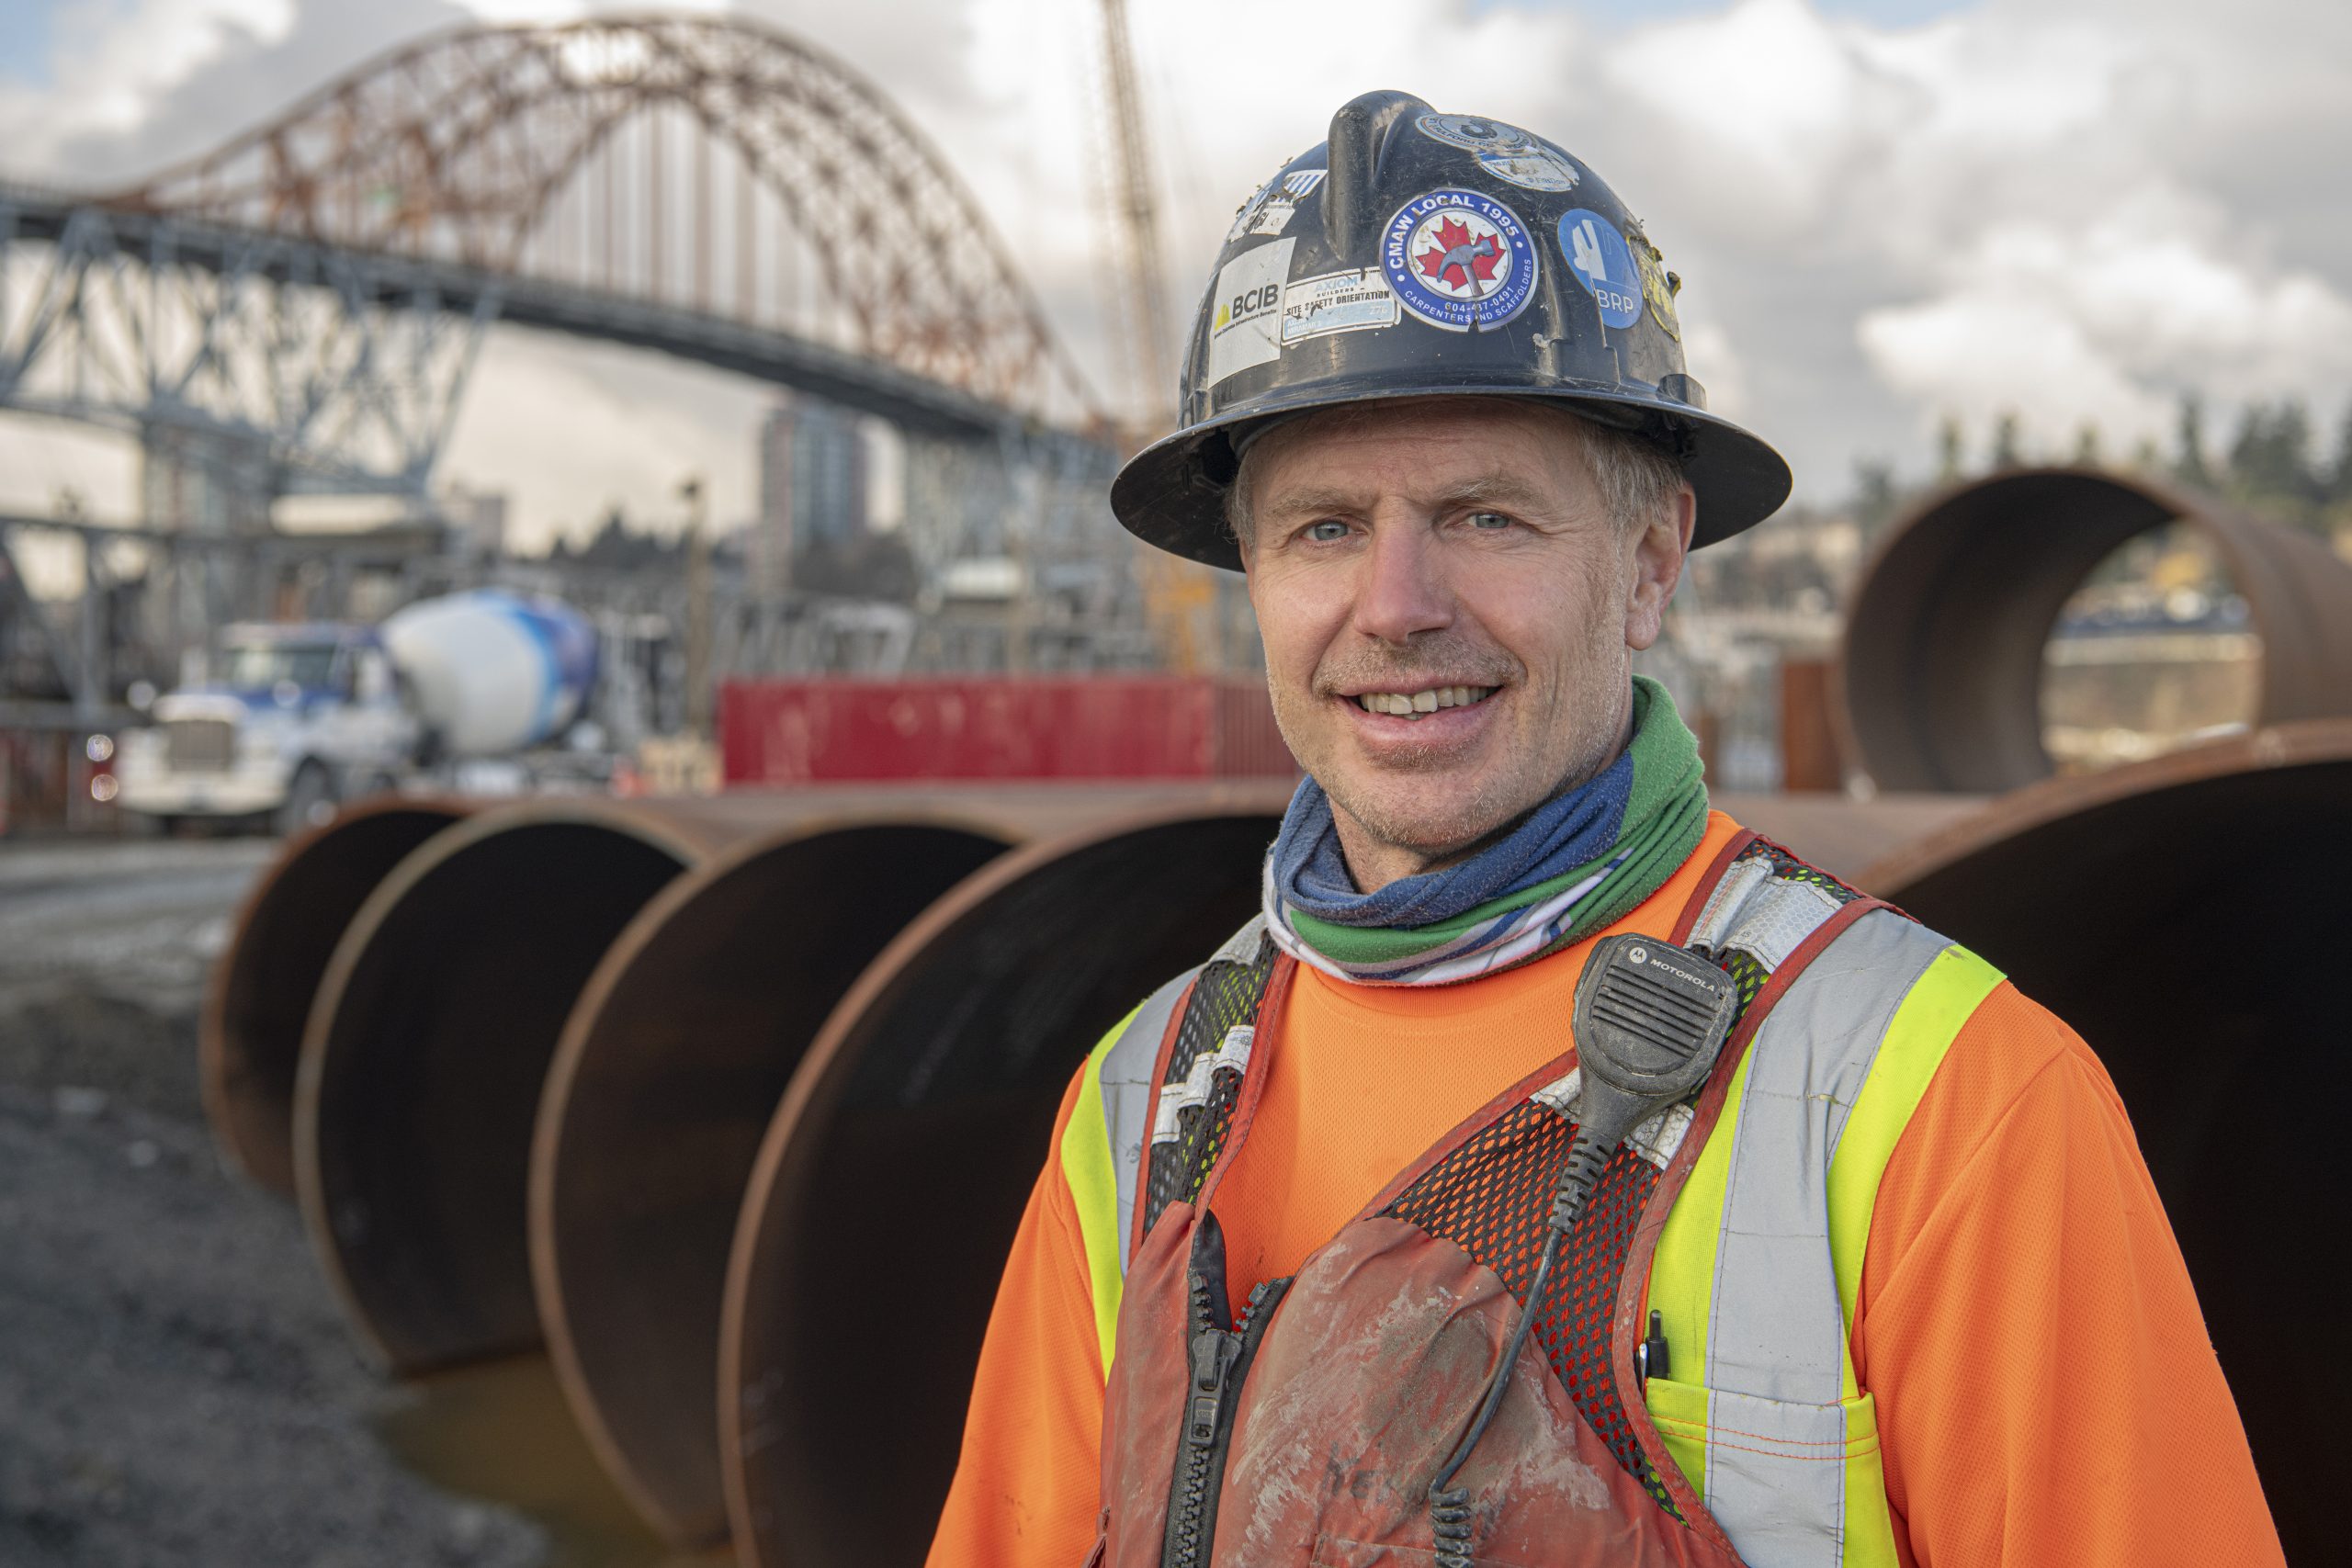 An image of a worker named Brian smiling